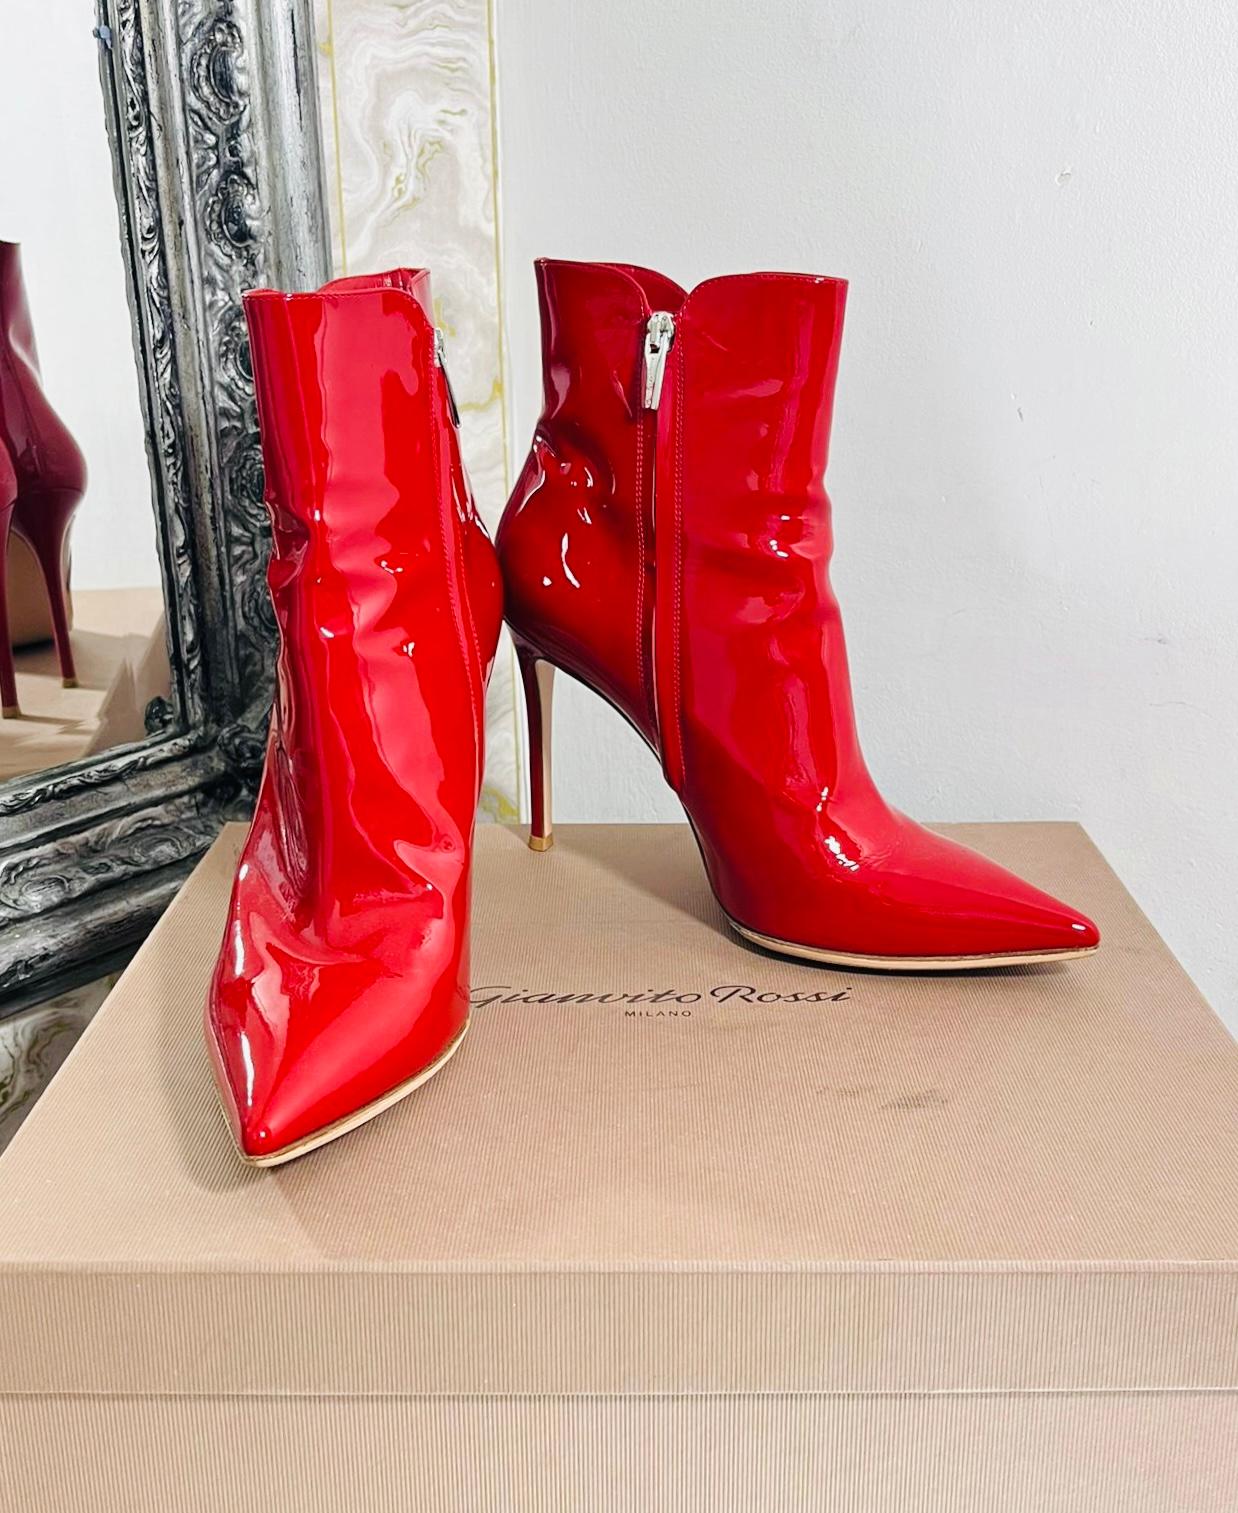 Gianvito Rossi Patent Leather Ankle Boots

Glossy red boots designed with pointed toe and stiletto heel.

Featuring zip fastening to the side, leather lining and soles.

Size – 40.5

Condition – Very Good

Composition – Patent Leather

Comes with –